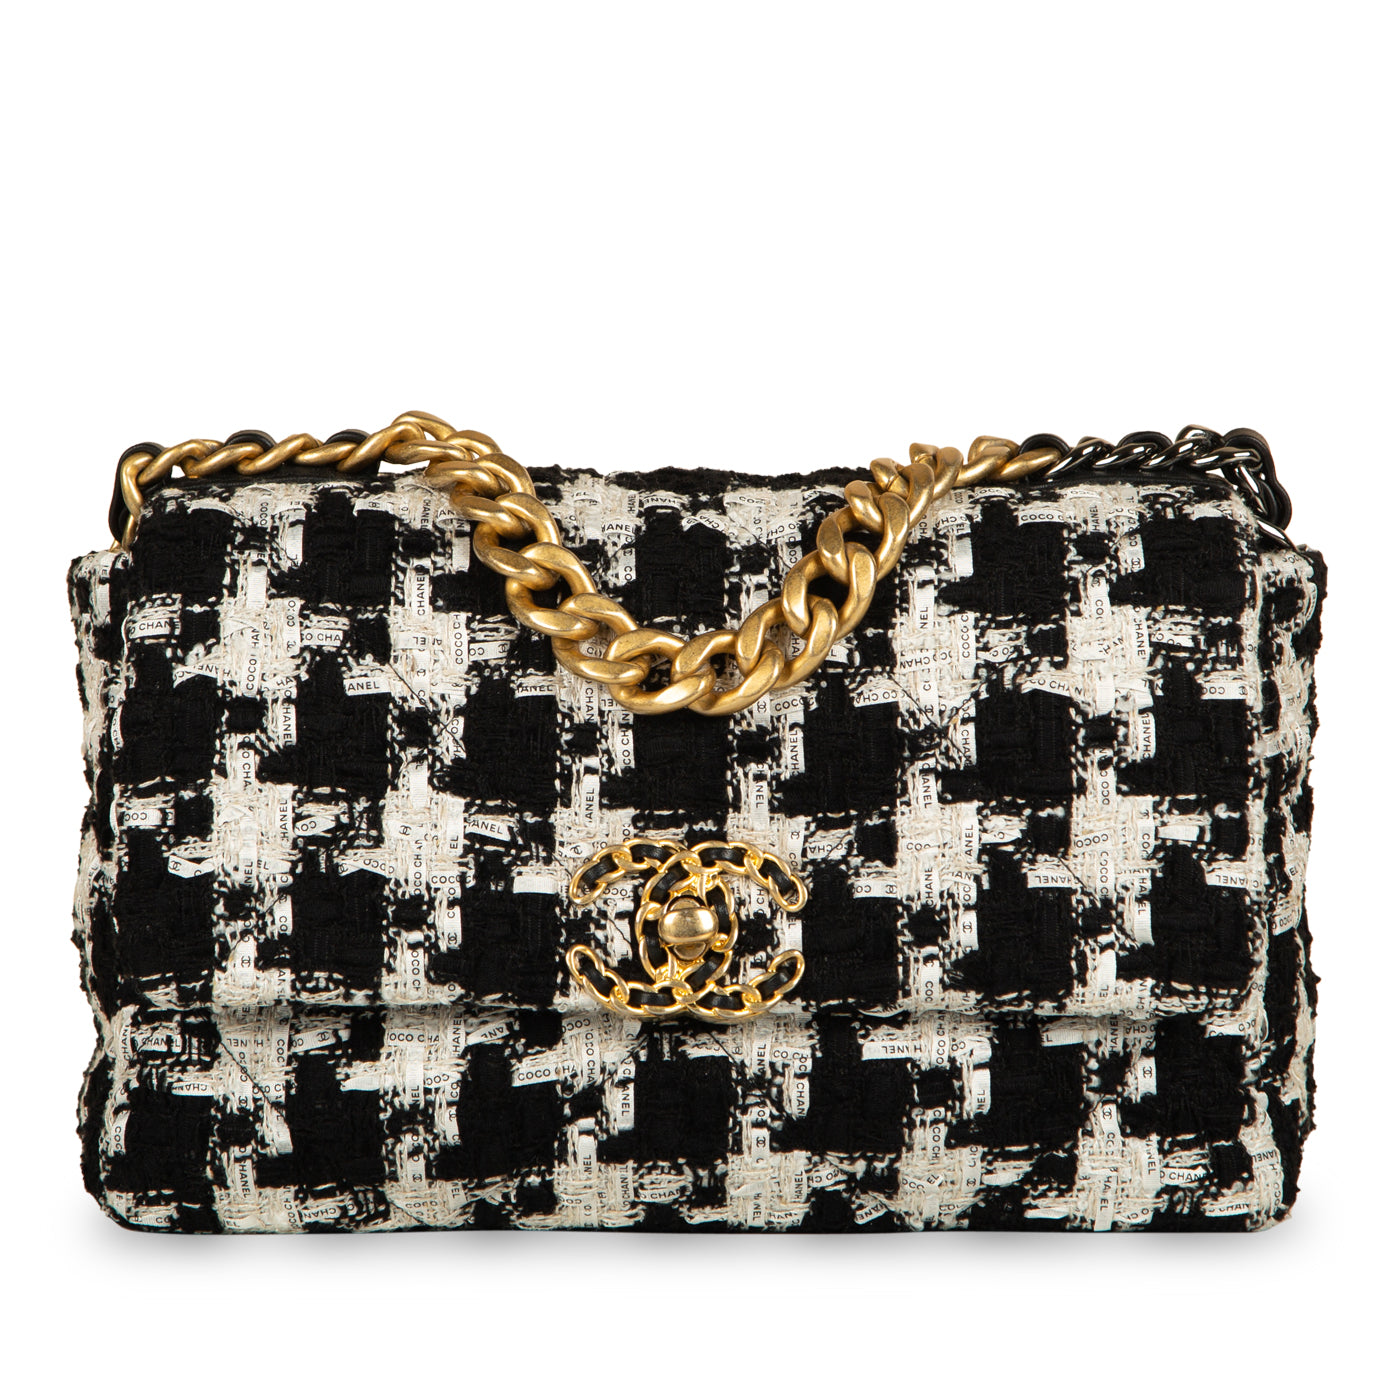 Chanel - Chanel 19 Flap Bag - Small - Black And White | Bagista